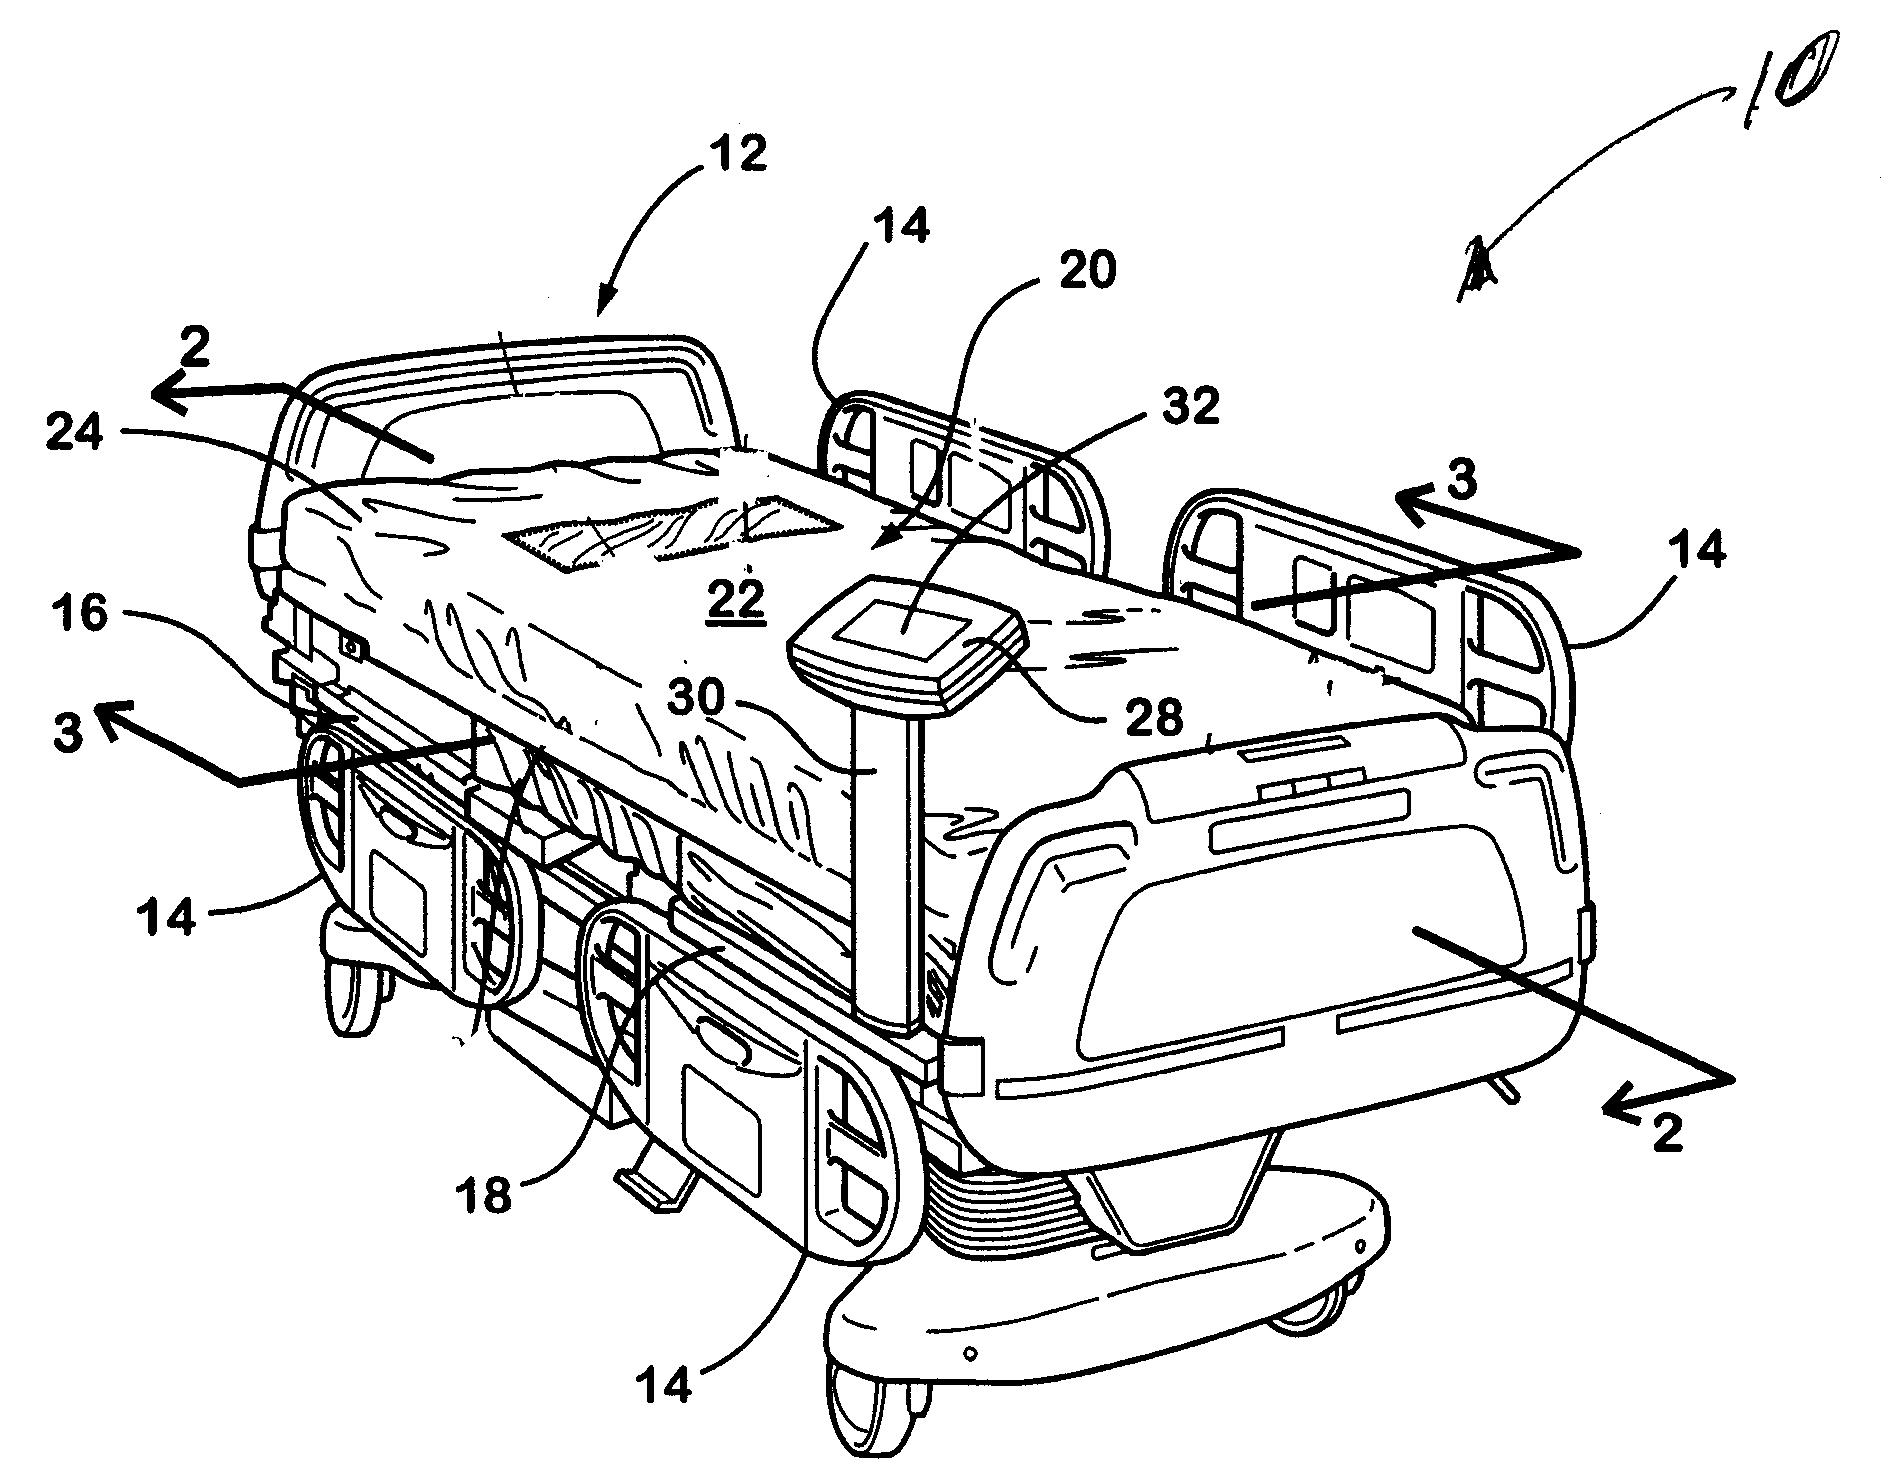 Vibrating patient support apparatus with a spring loaded percussion device